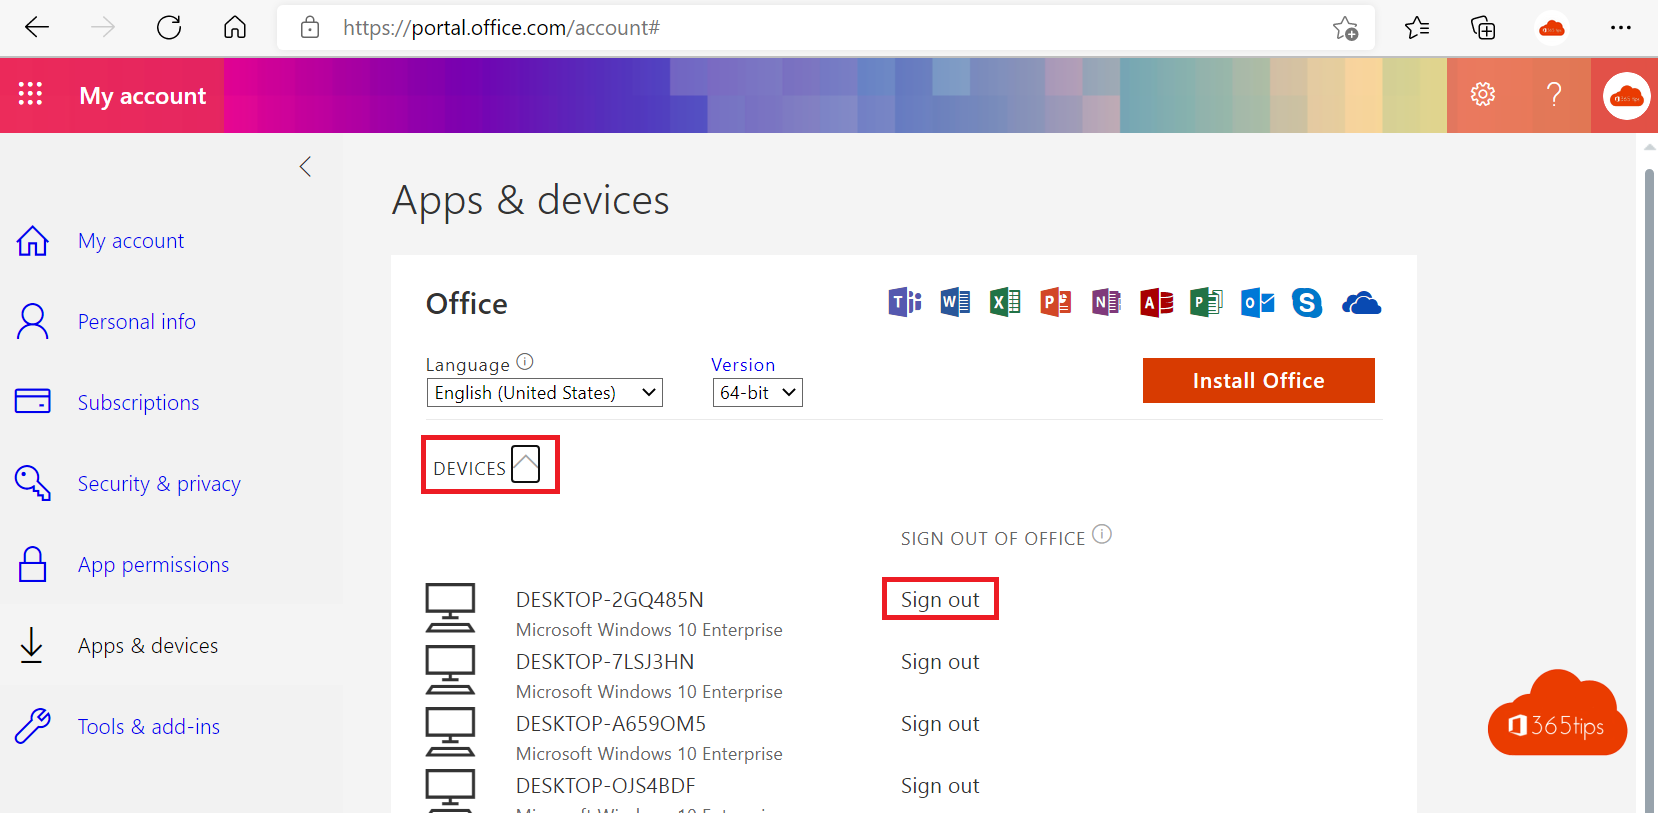 ❌ How to remove a device from your Microsoft account or Office 365 account